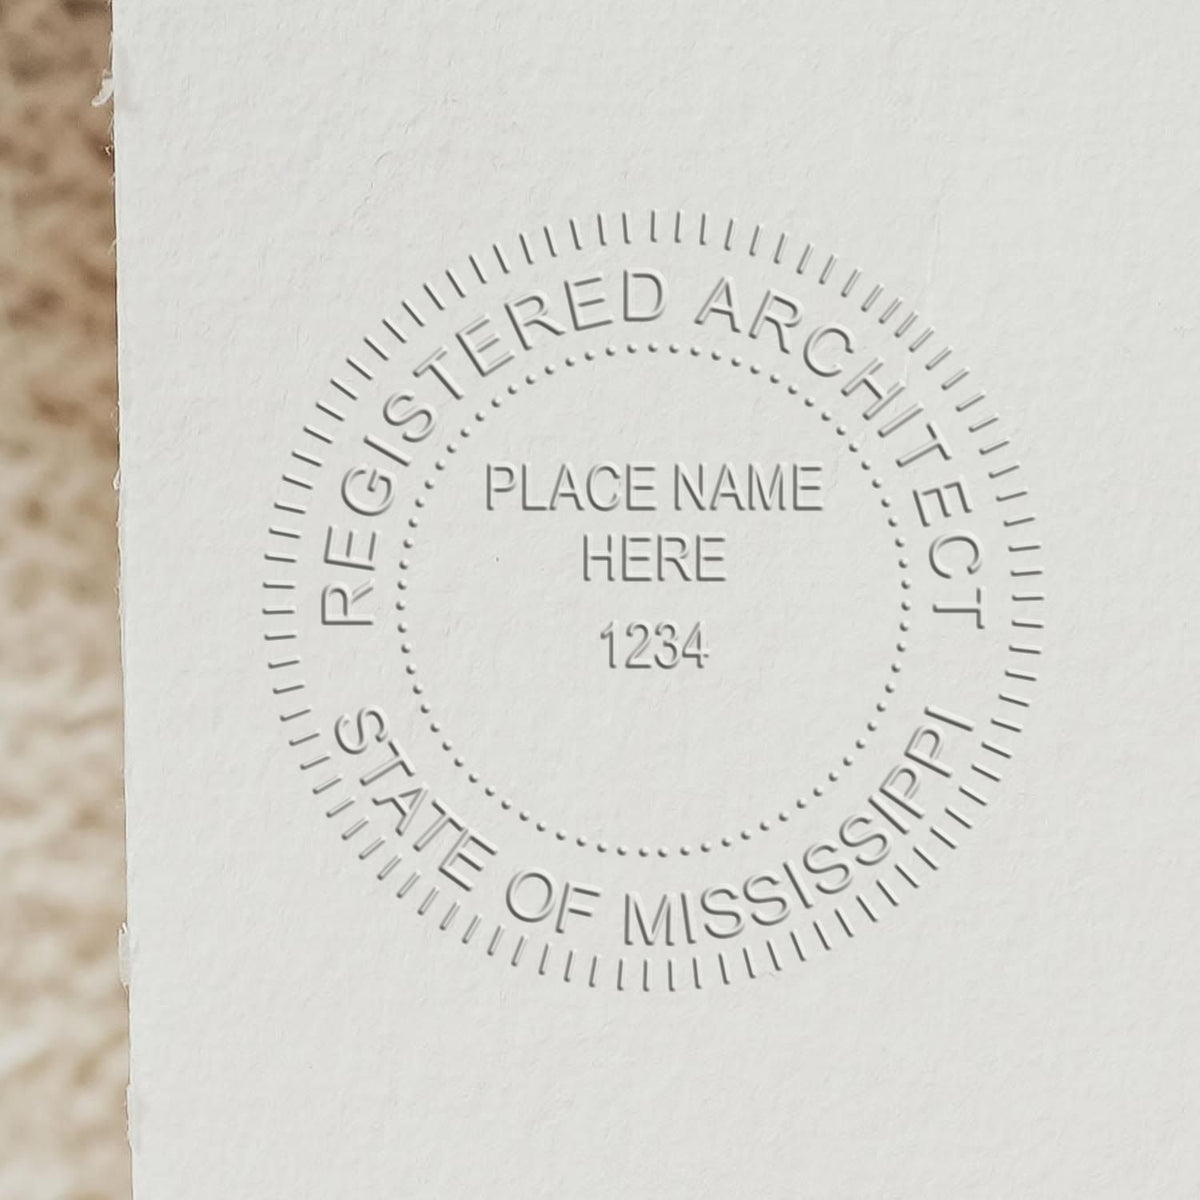 A photograph of the Hybrid Mississippi Architect Seal stamp impression reveals a vivid, professional image of the on paper.